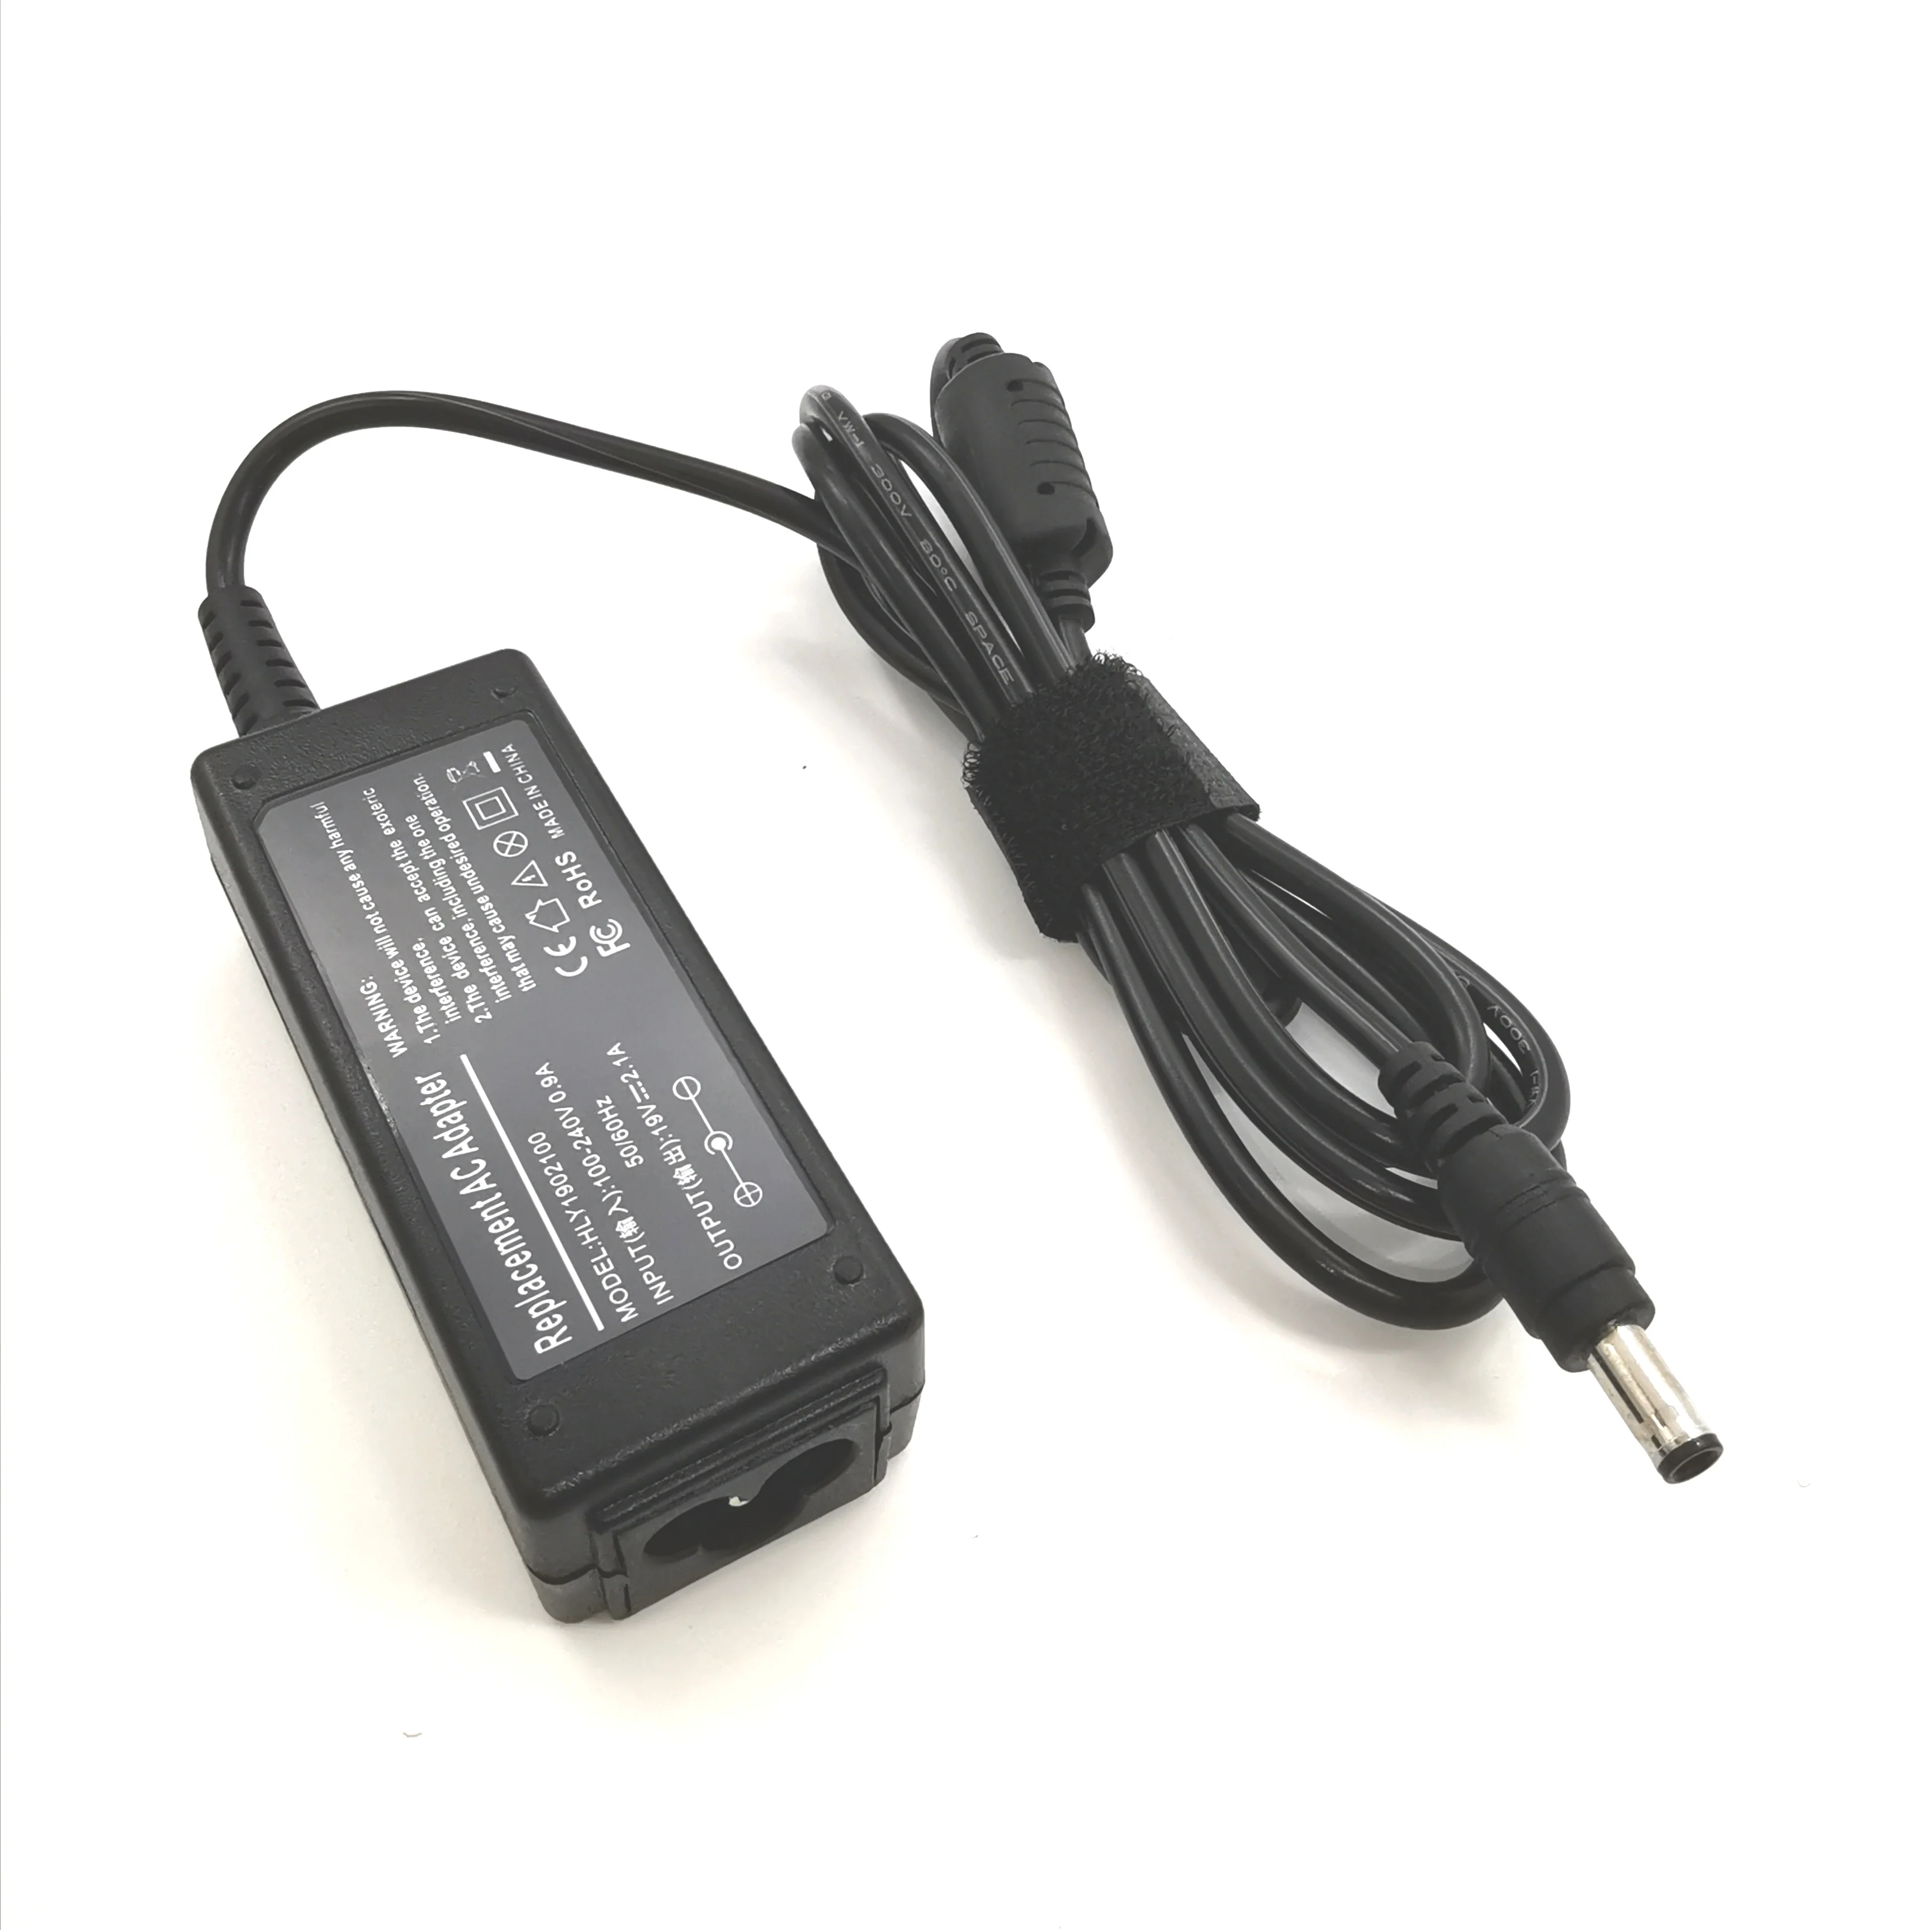 19V 2.1A 40W 5.5*3.0mm AC Adapter Power Charger For SAMSUNG N110 N120 N130 NC10 